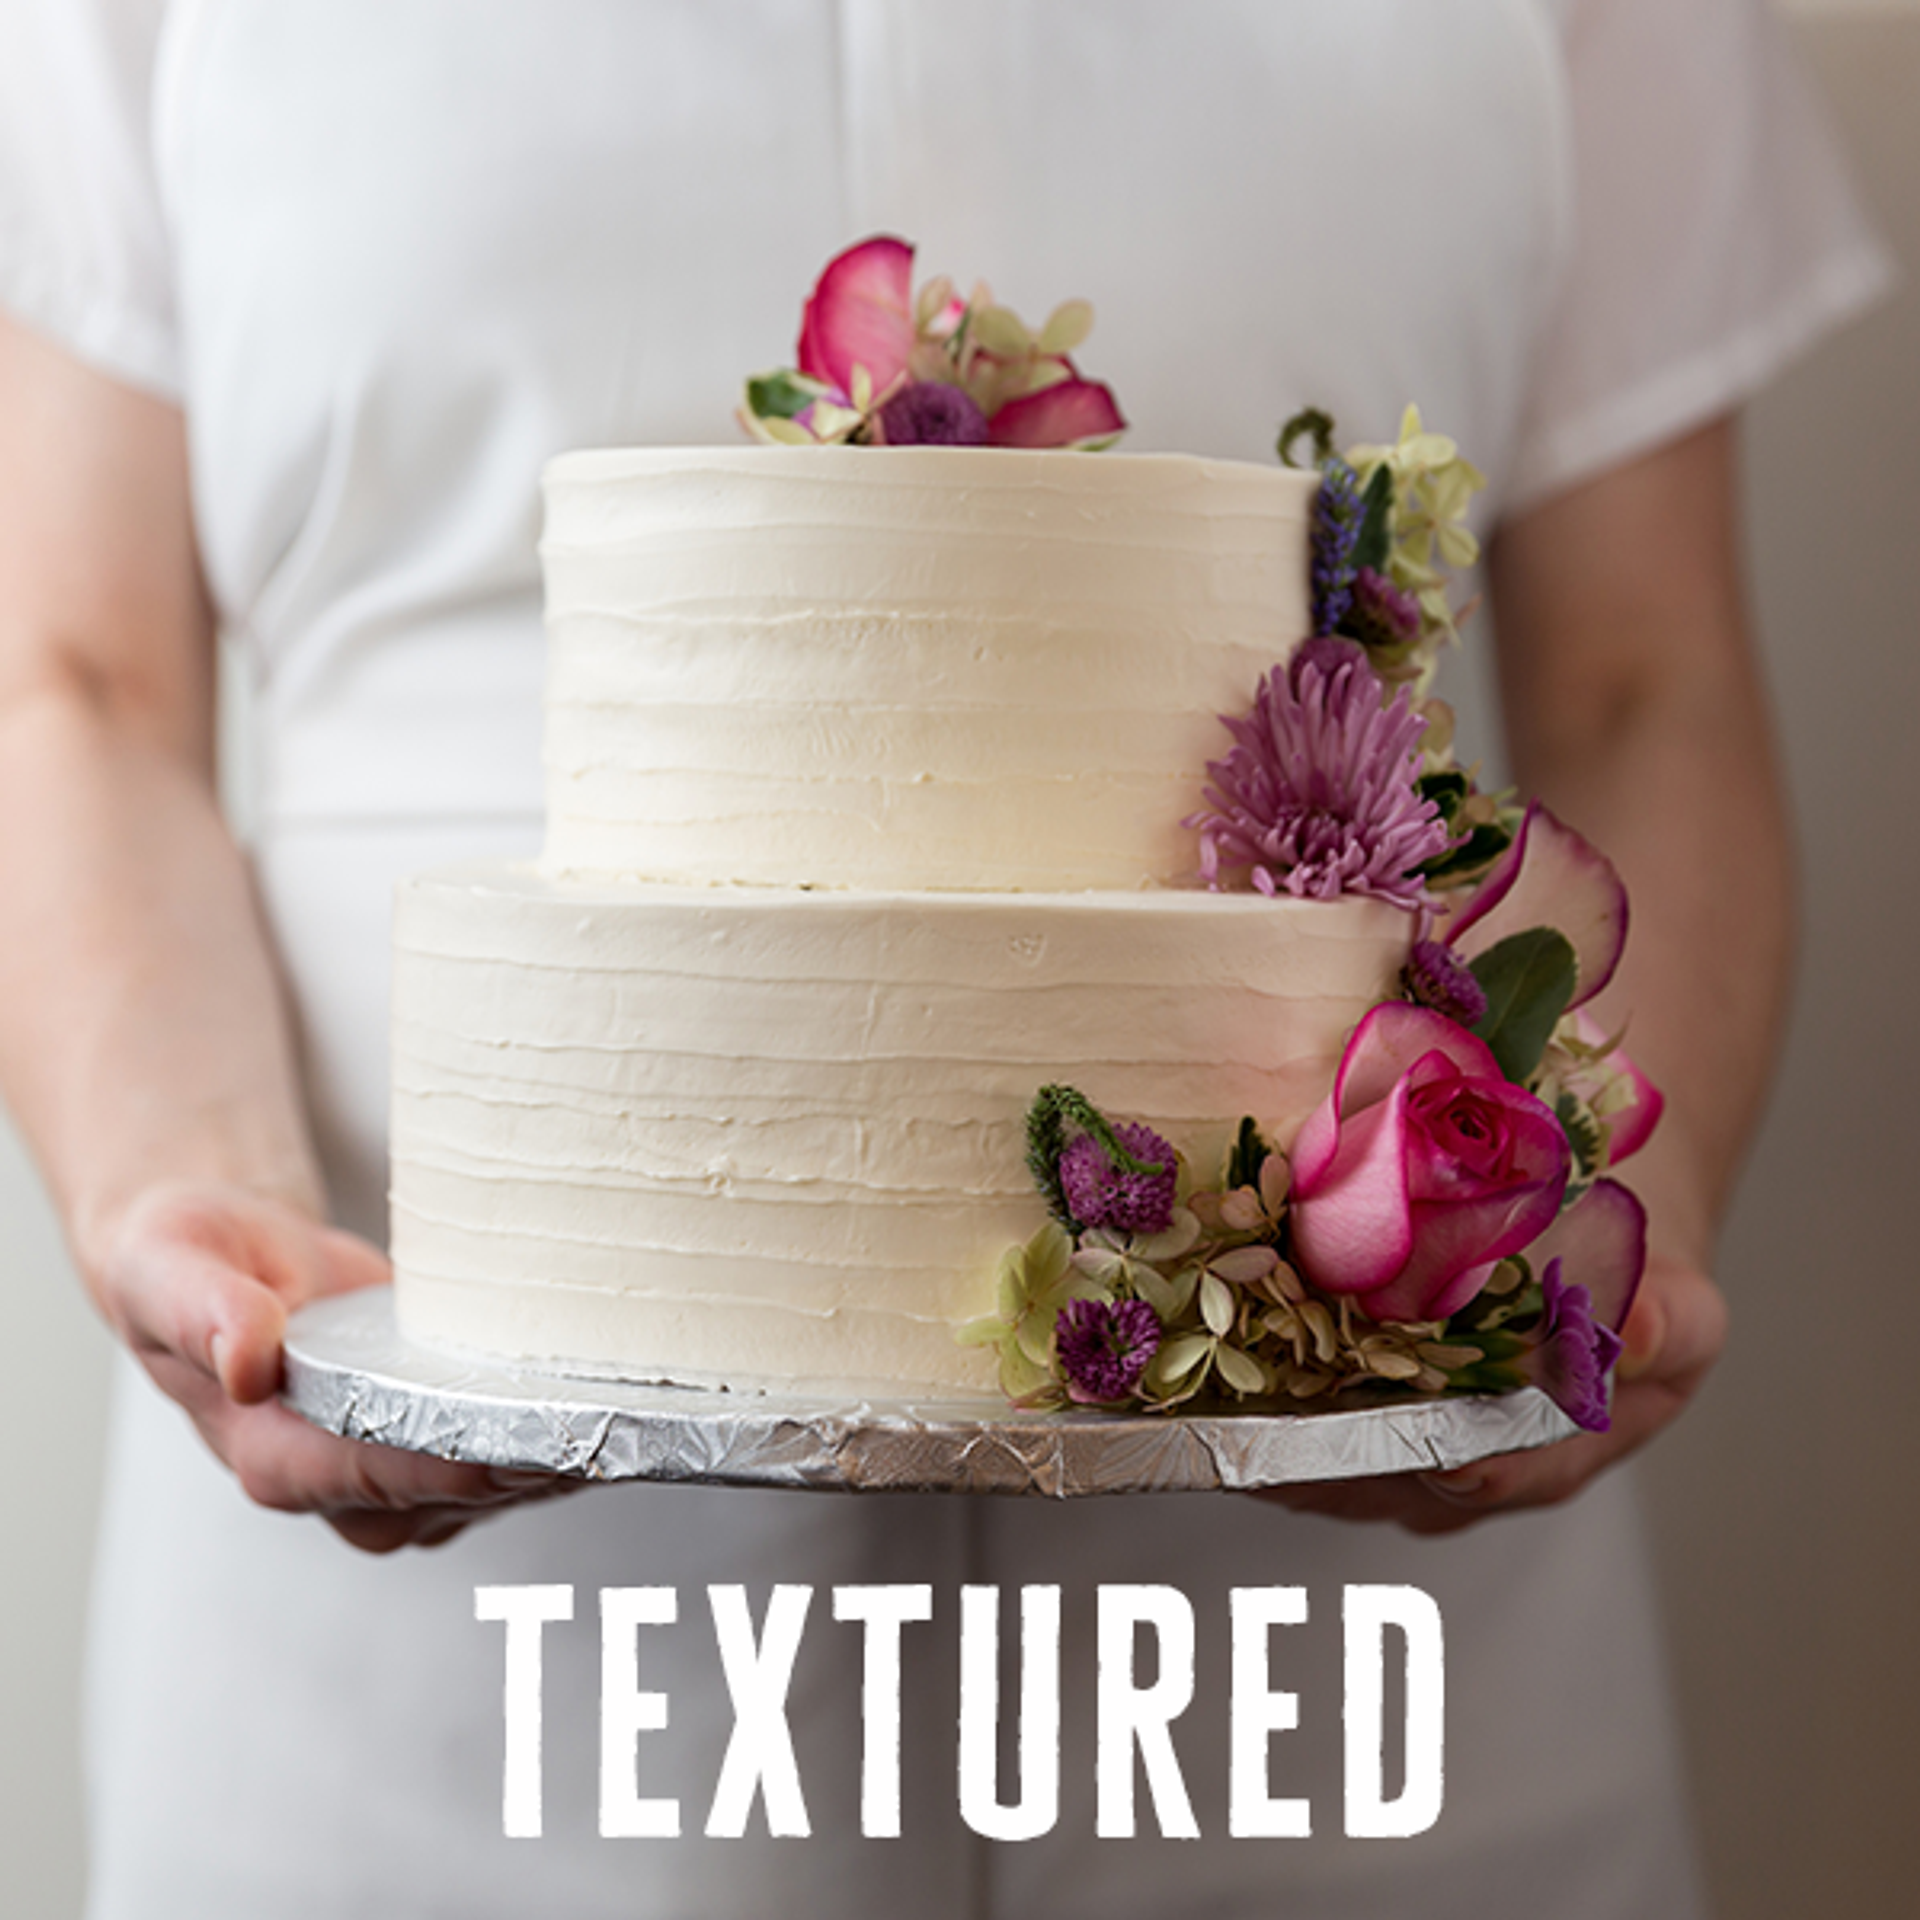 Wedding Cake with textured finished with pink flowers